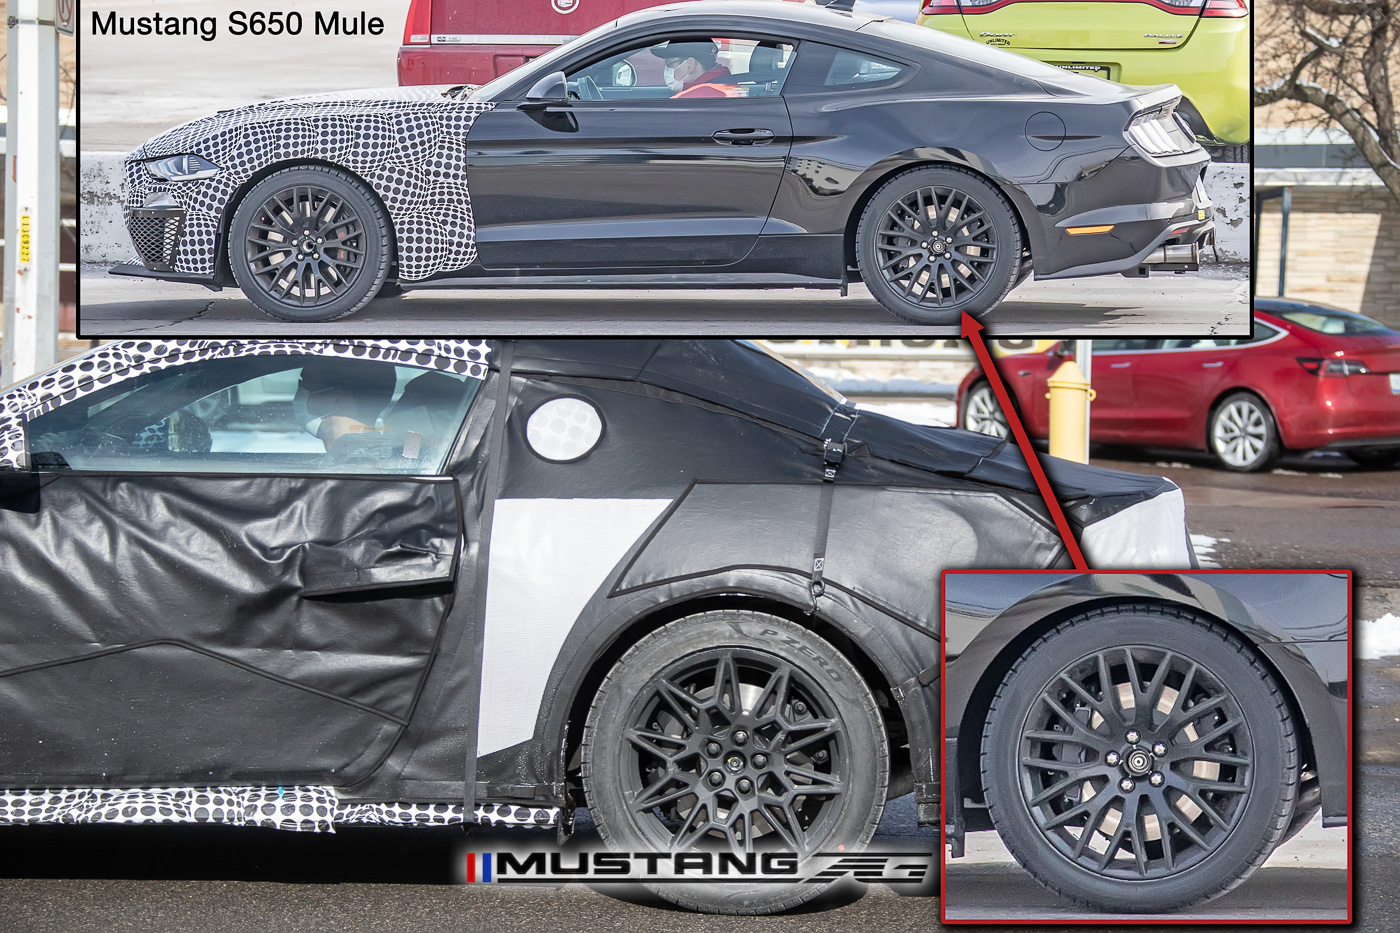 S650 Mustang Spied: New Mustang Prototype w/ Mach 1-Style Wheels, Upgraded Dual Caliper Rear Brakes 📸 s650-mustang-new-mach1-prototype-spied-11